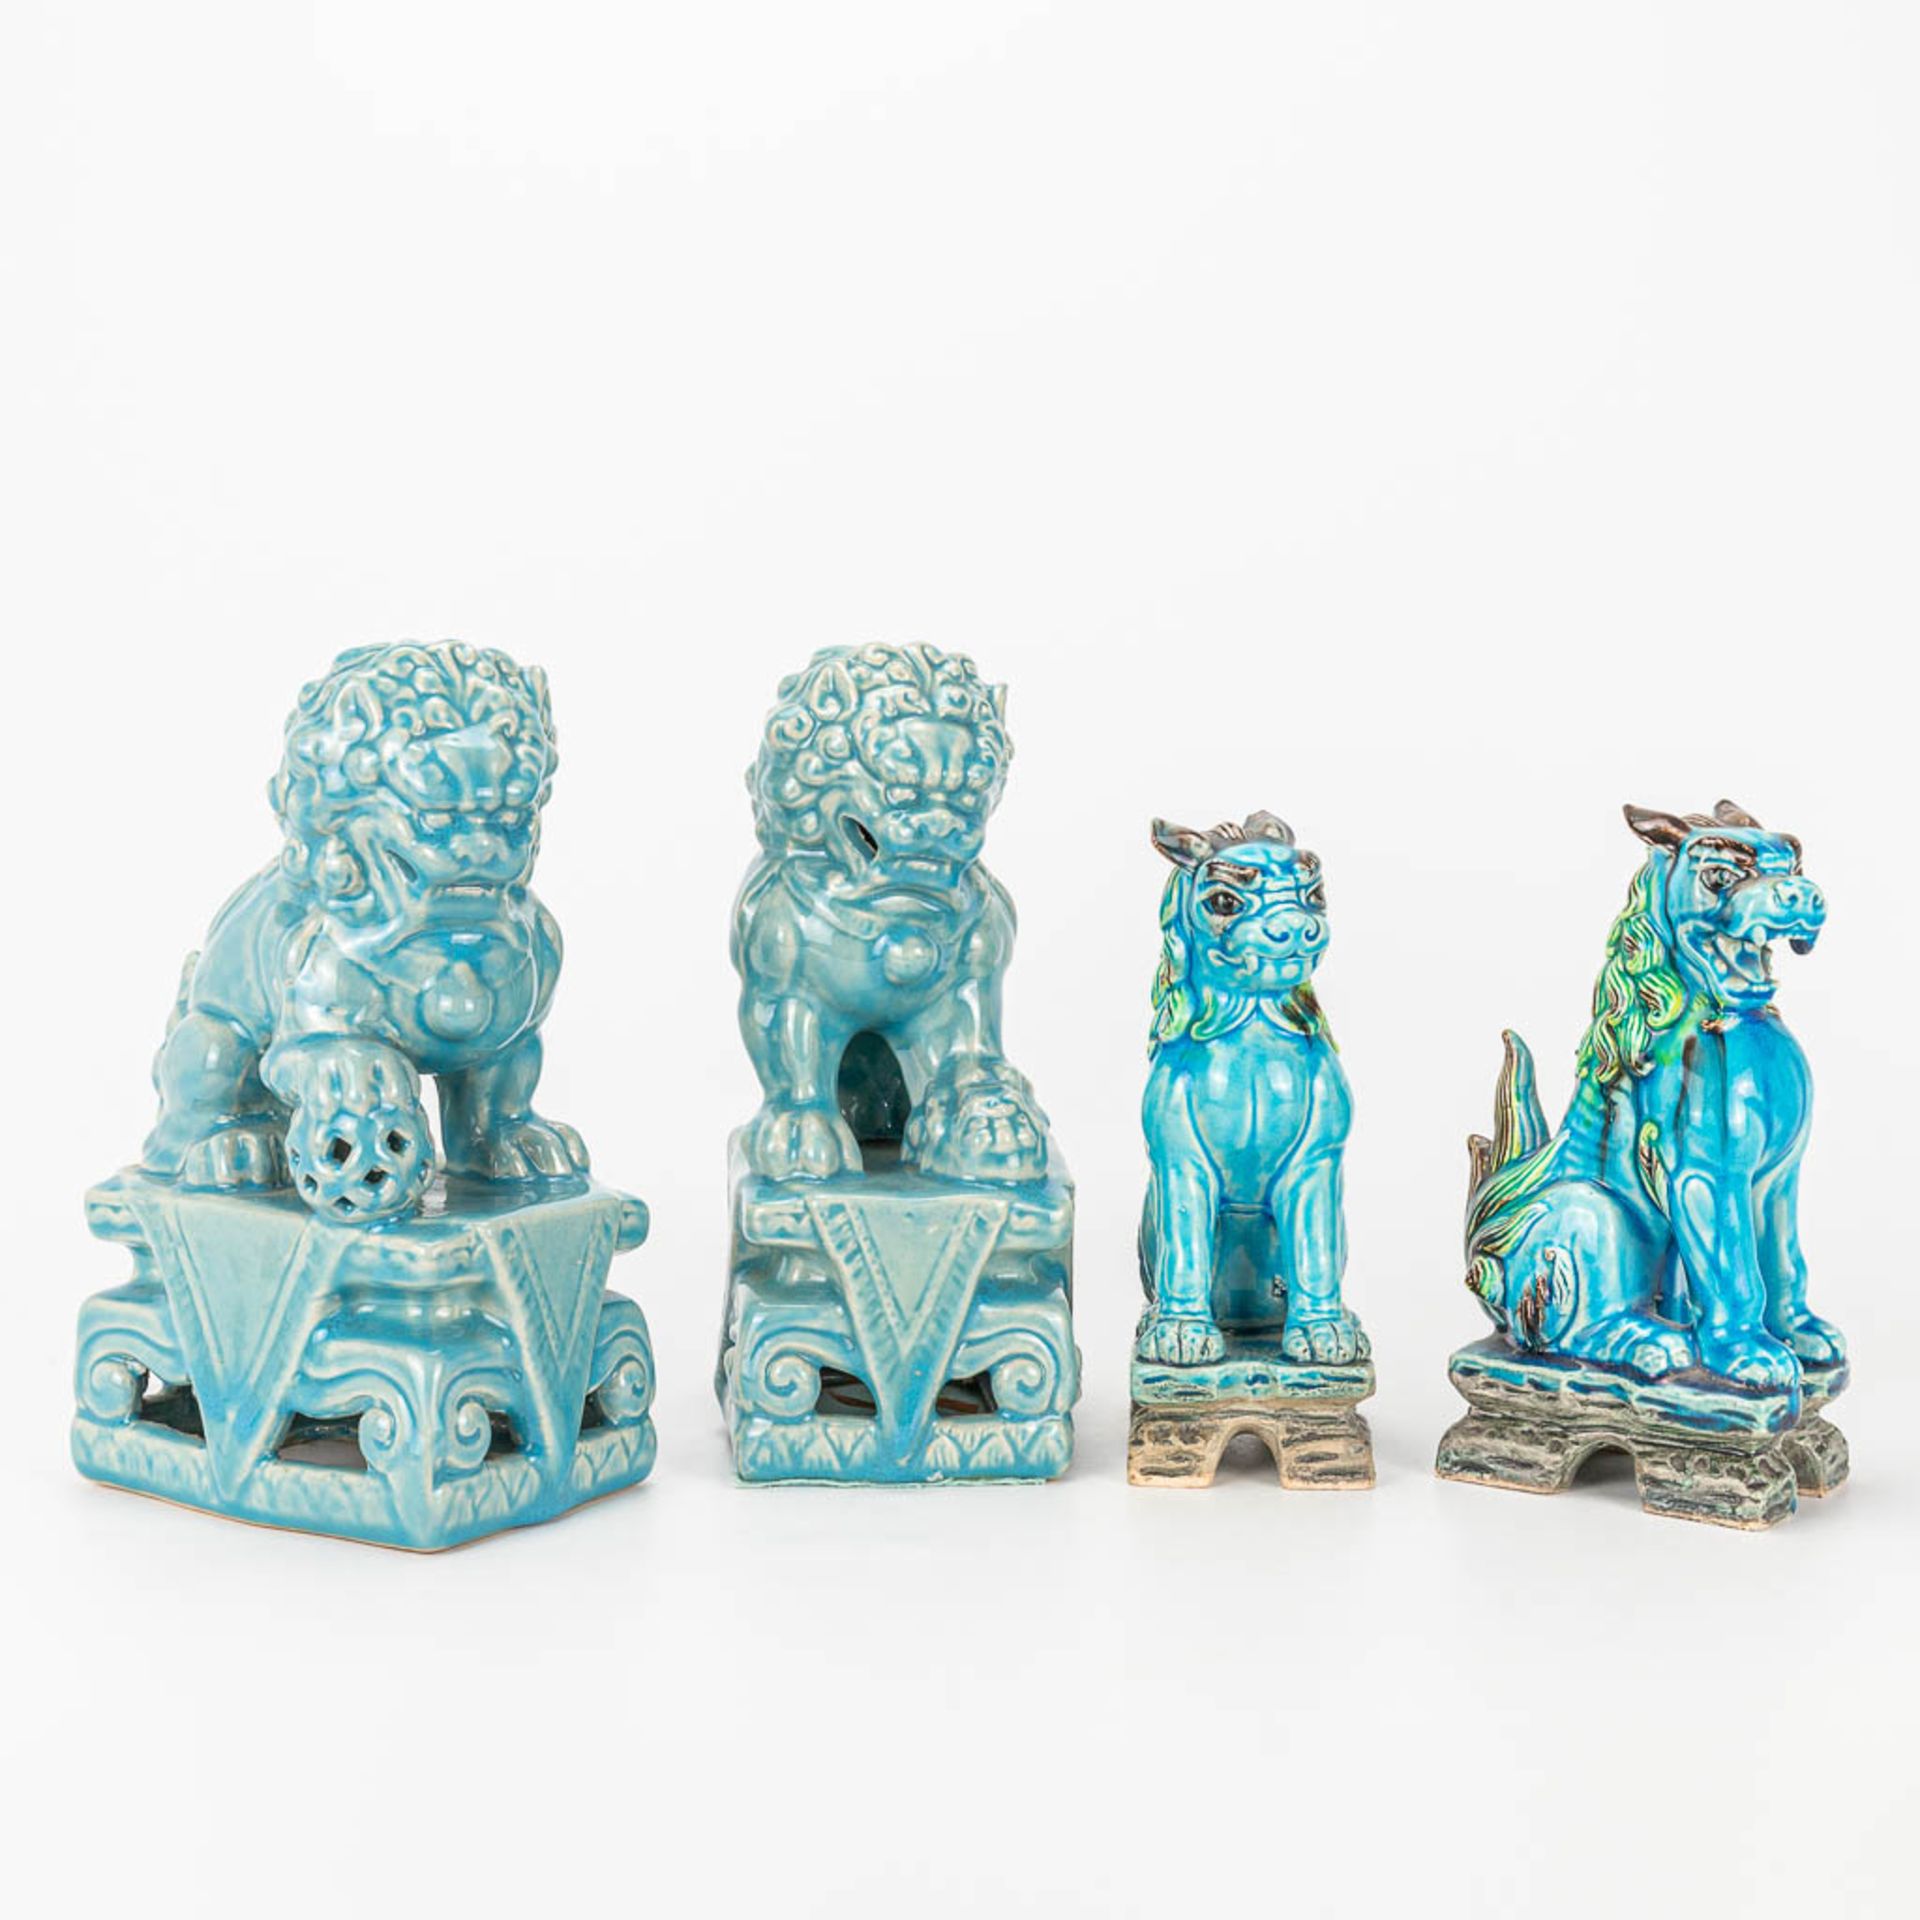 A collection of 4 Foo dogs and lions.